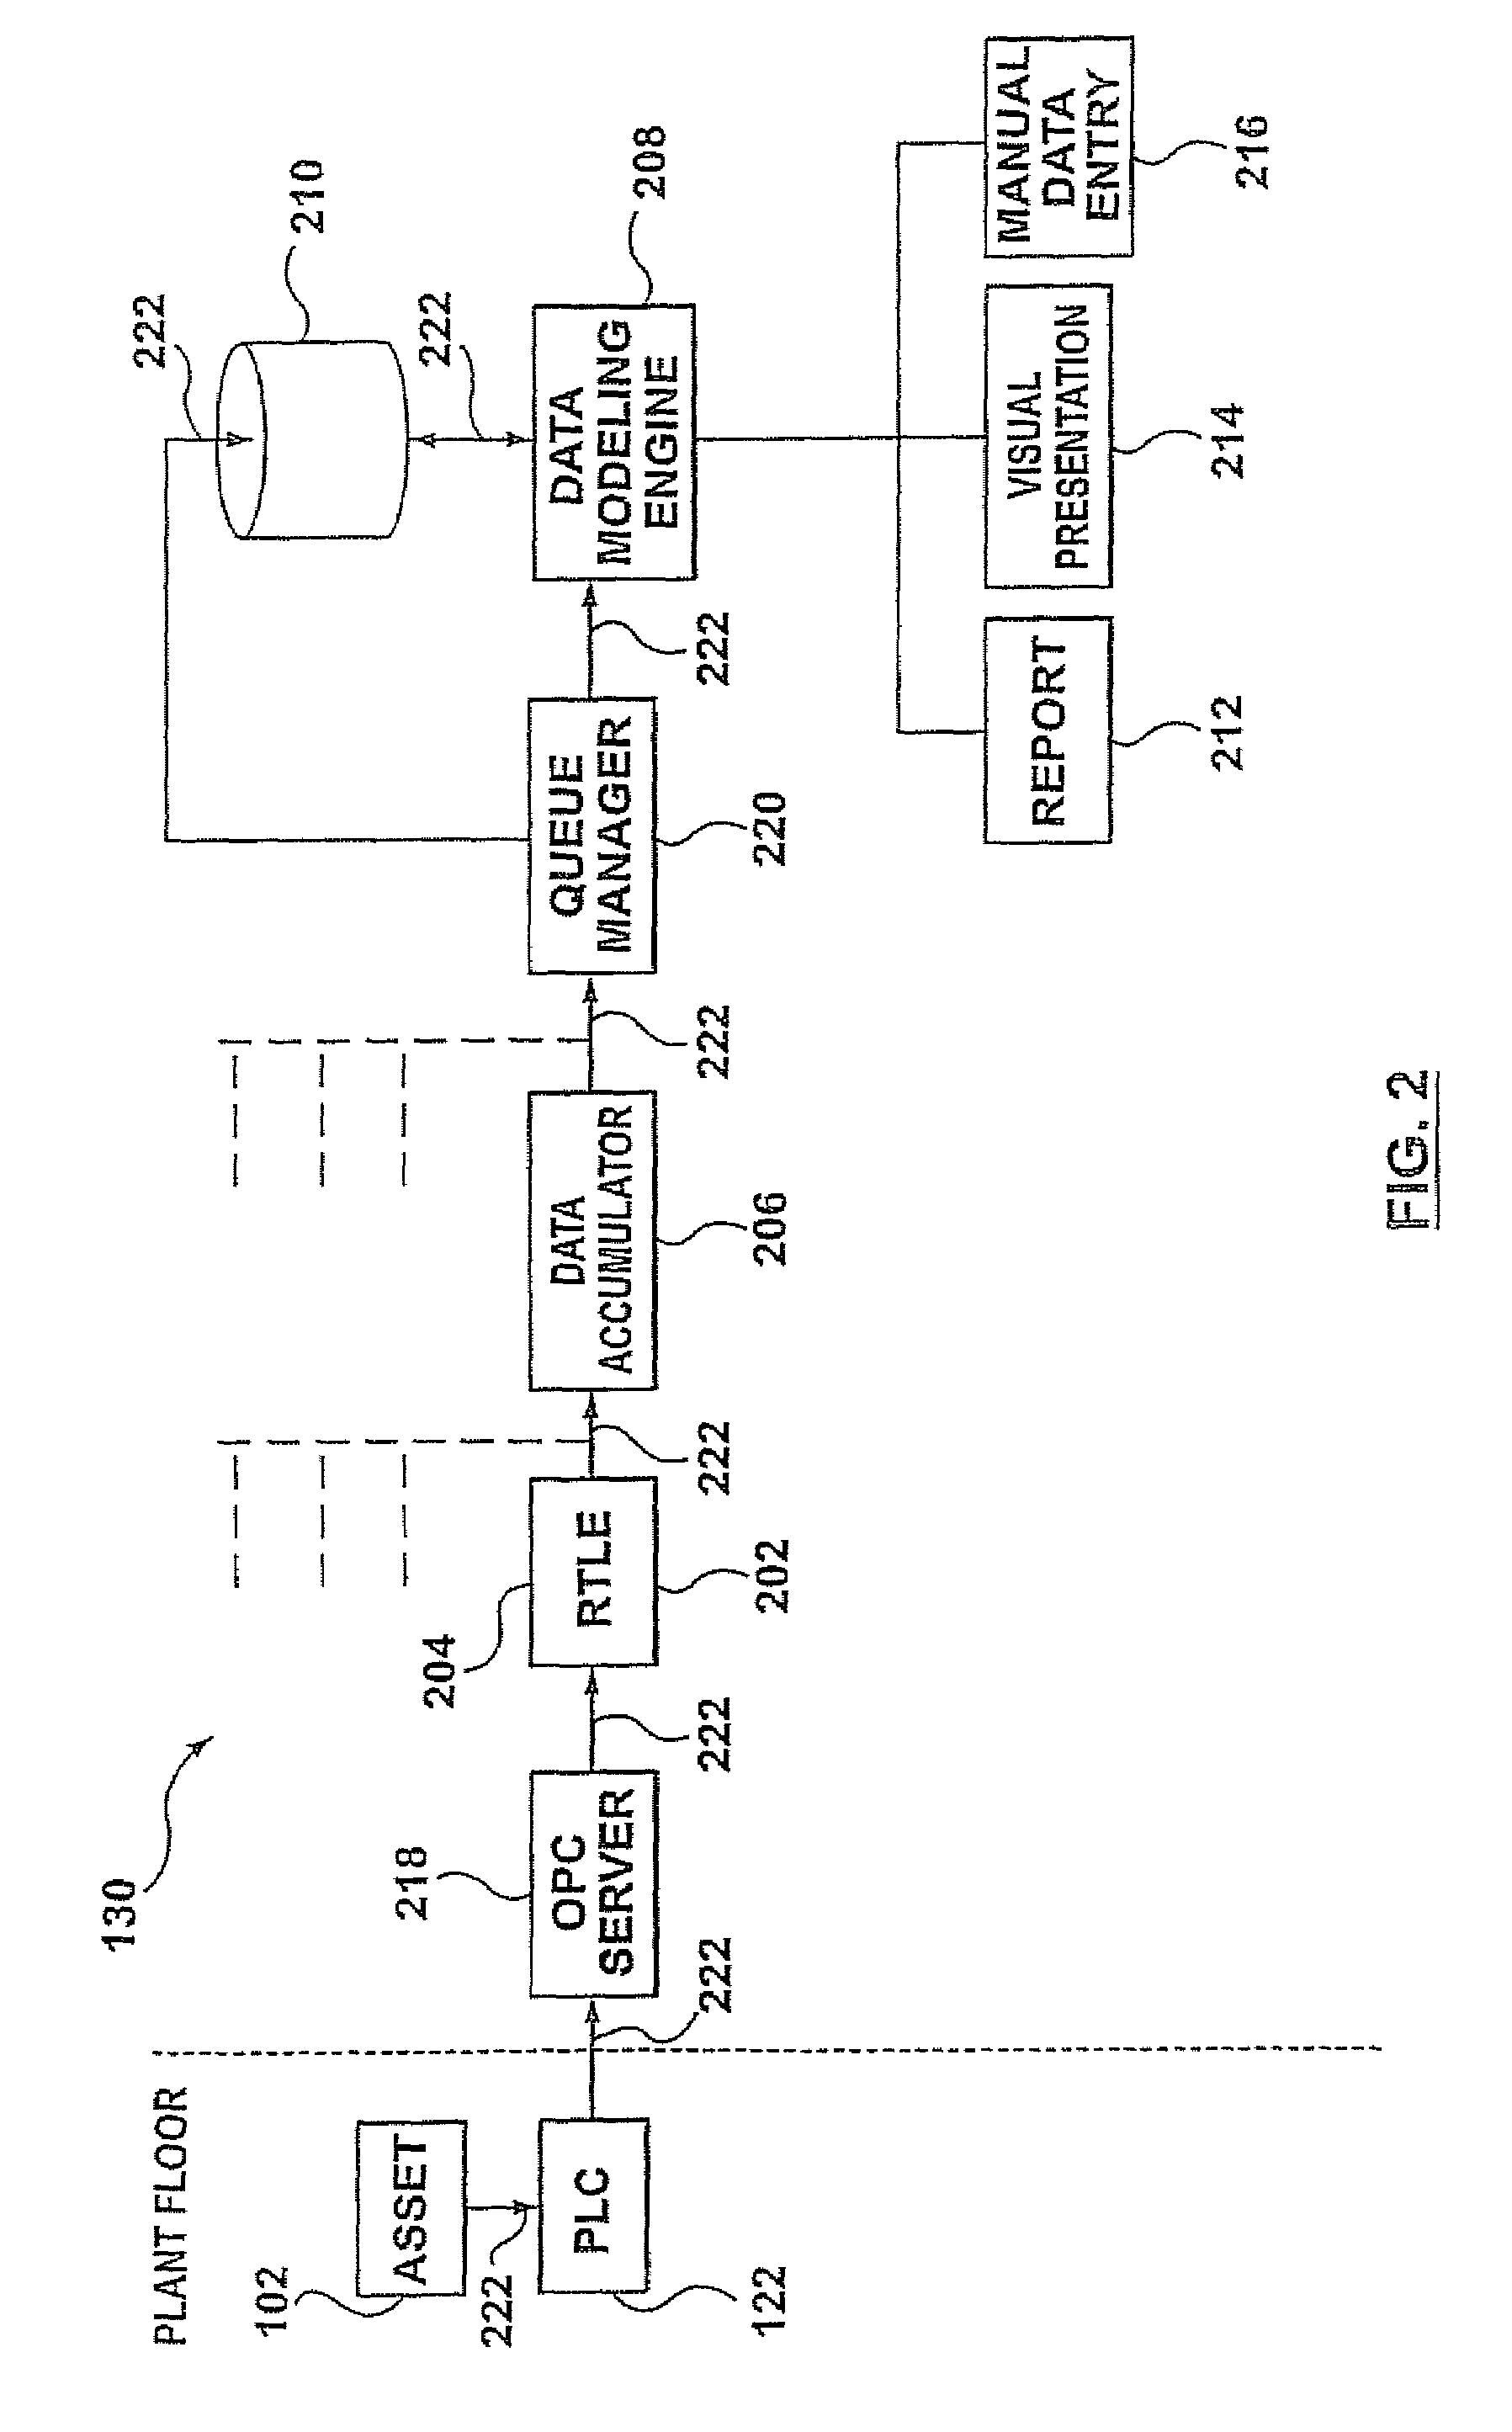 System and method of monitoring and quantifying performance of an automated manufacturing facility